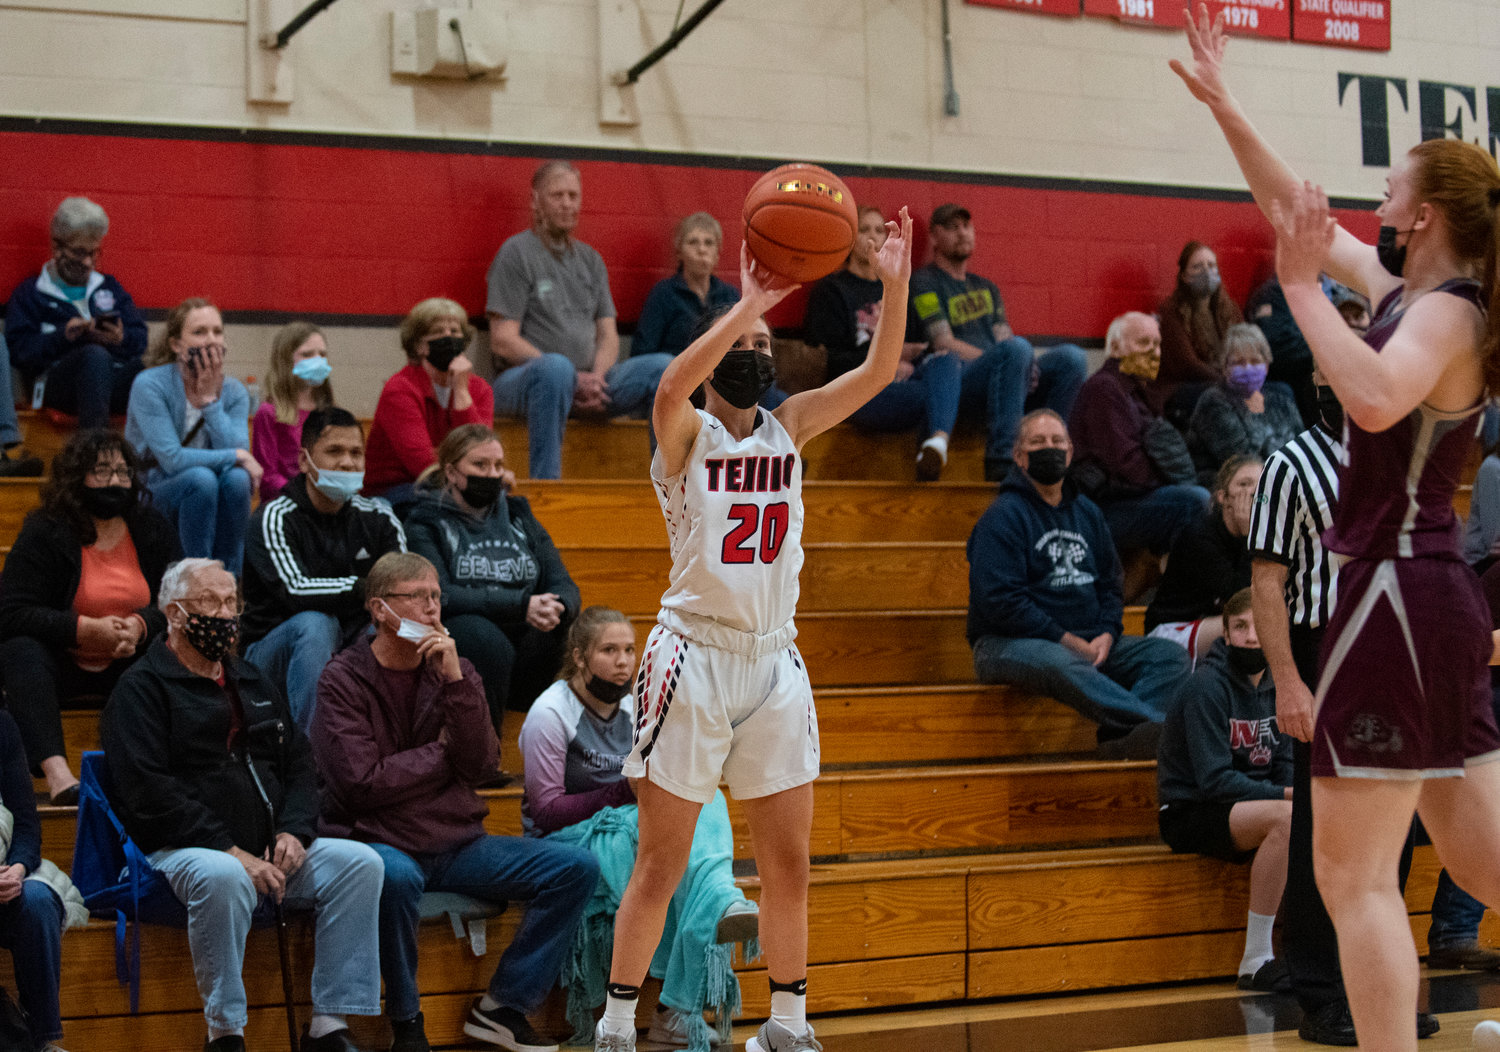 A Tenino player (20) shoots a 3-pointer against Montesano on Thursday.